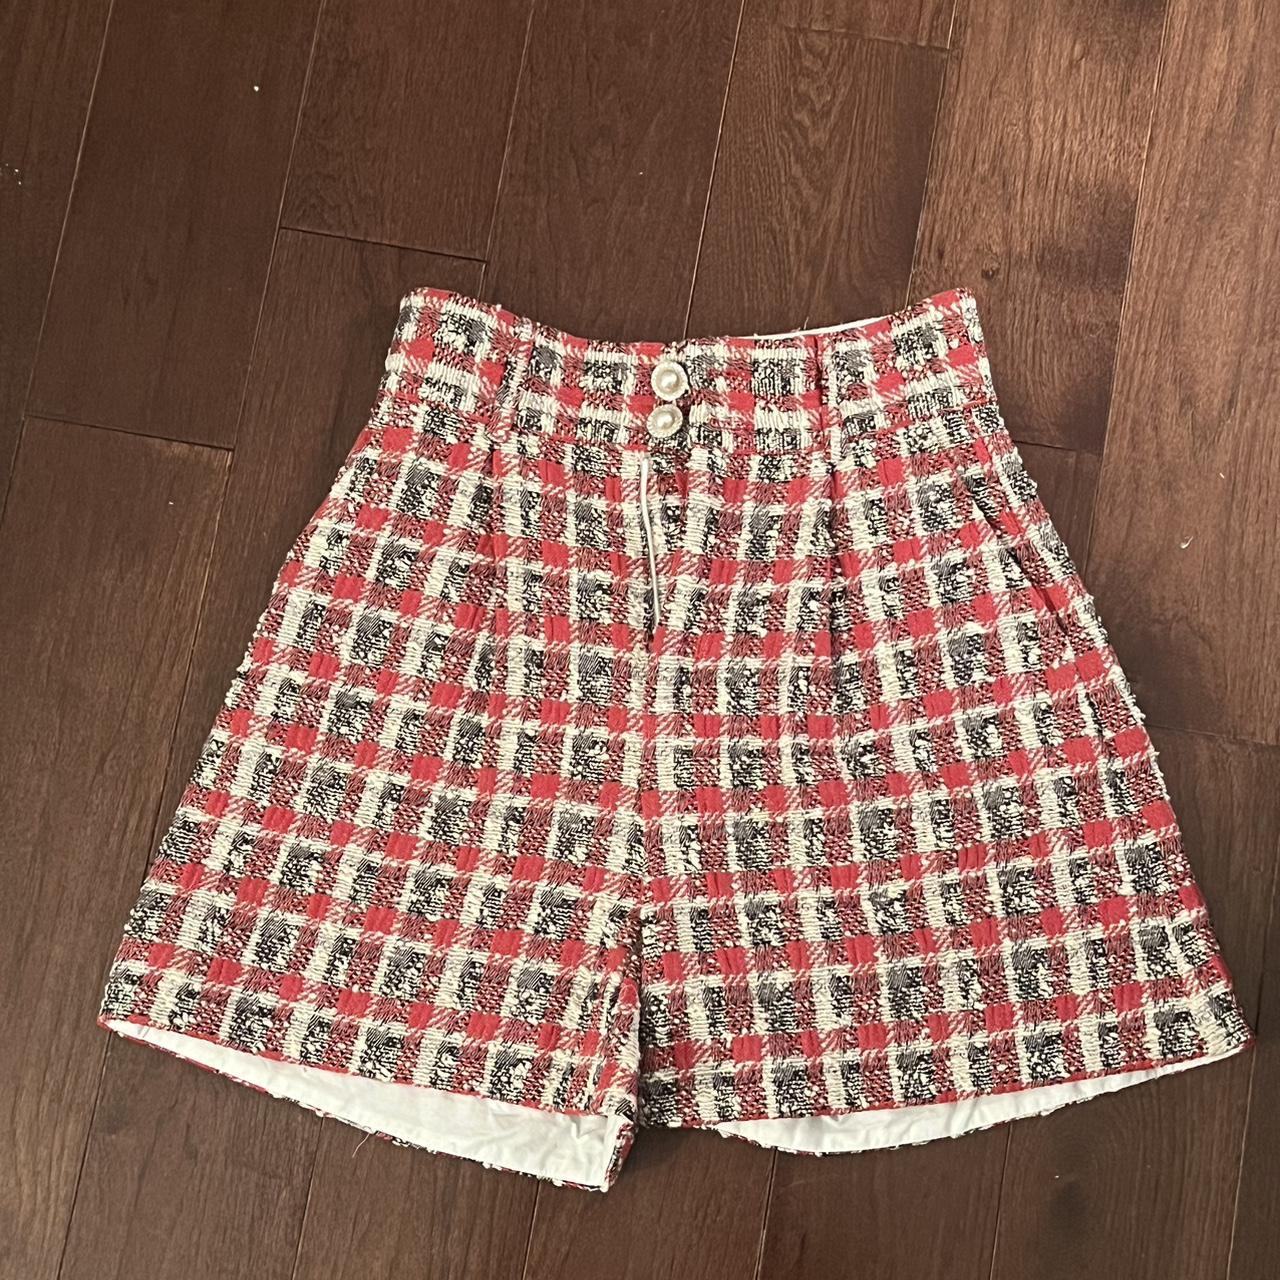 Women's Red and White Shorts | Depop